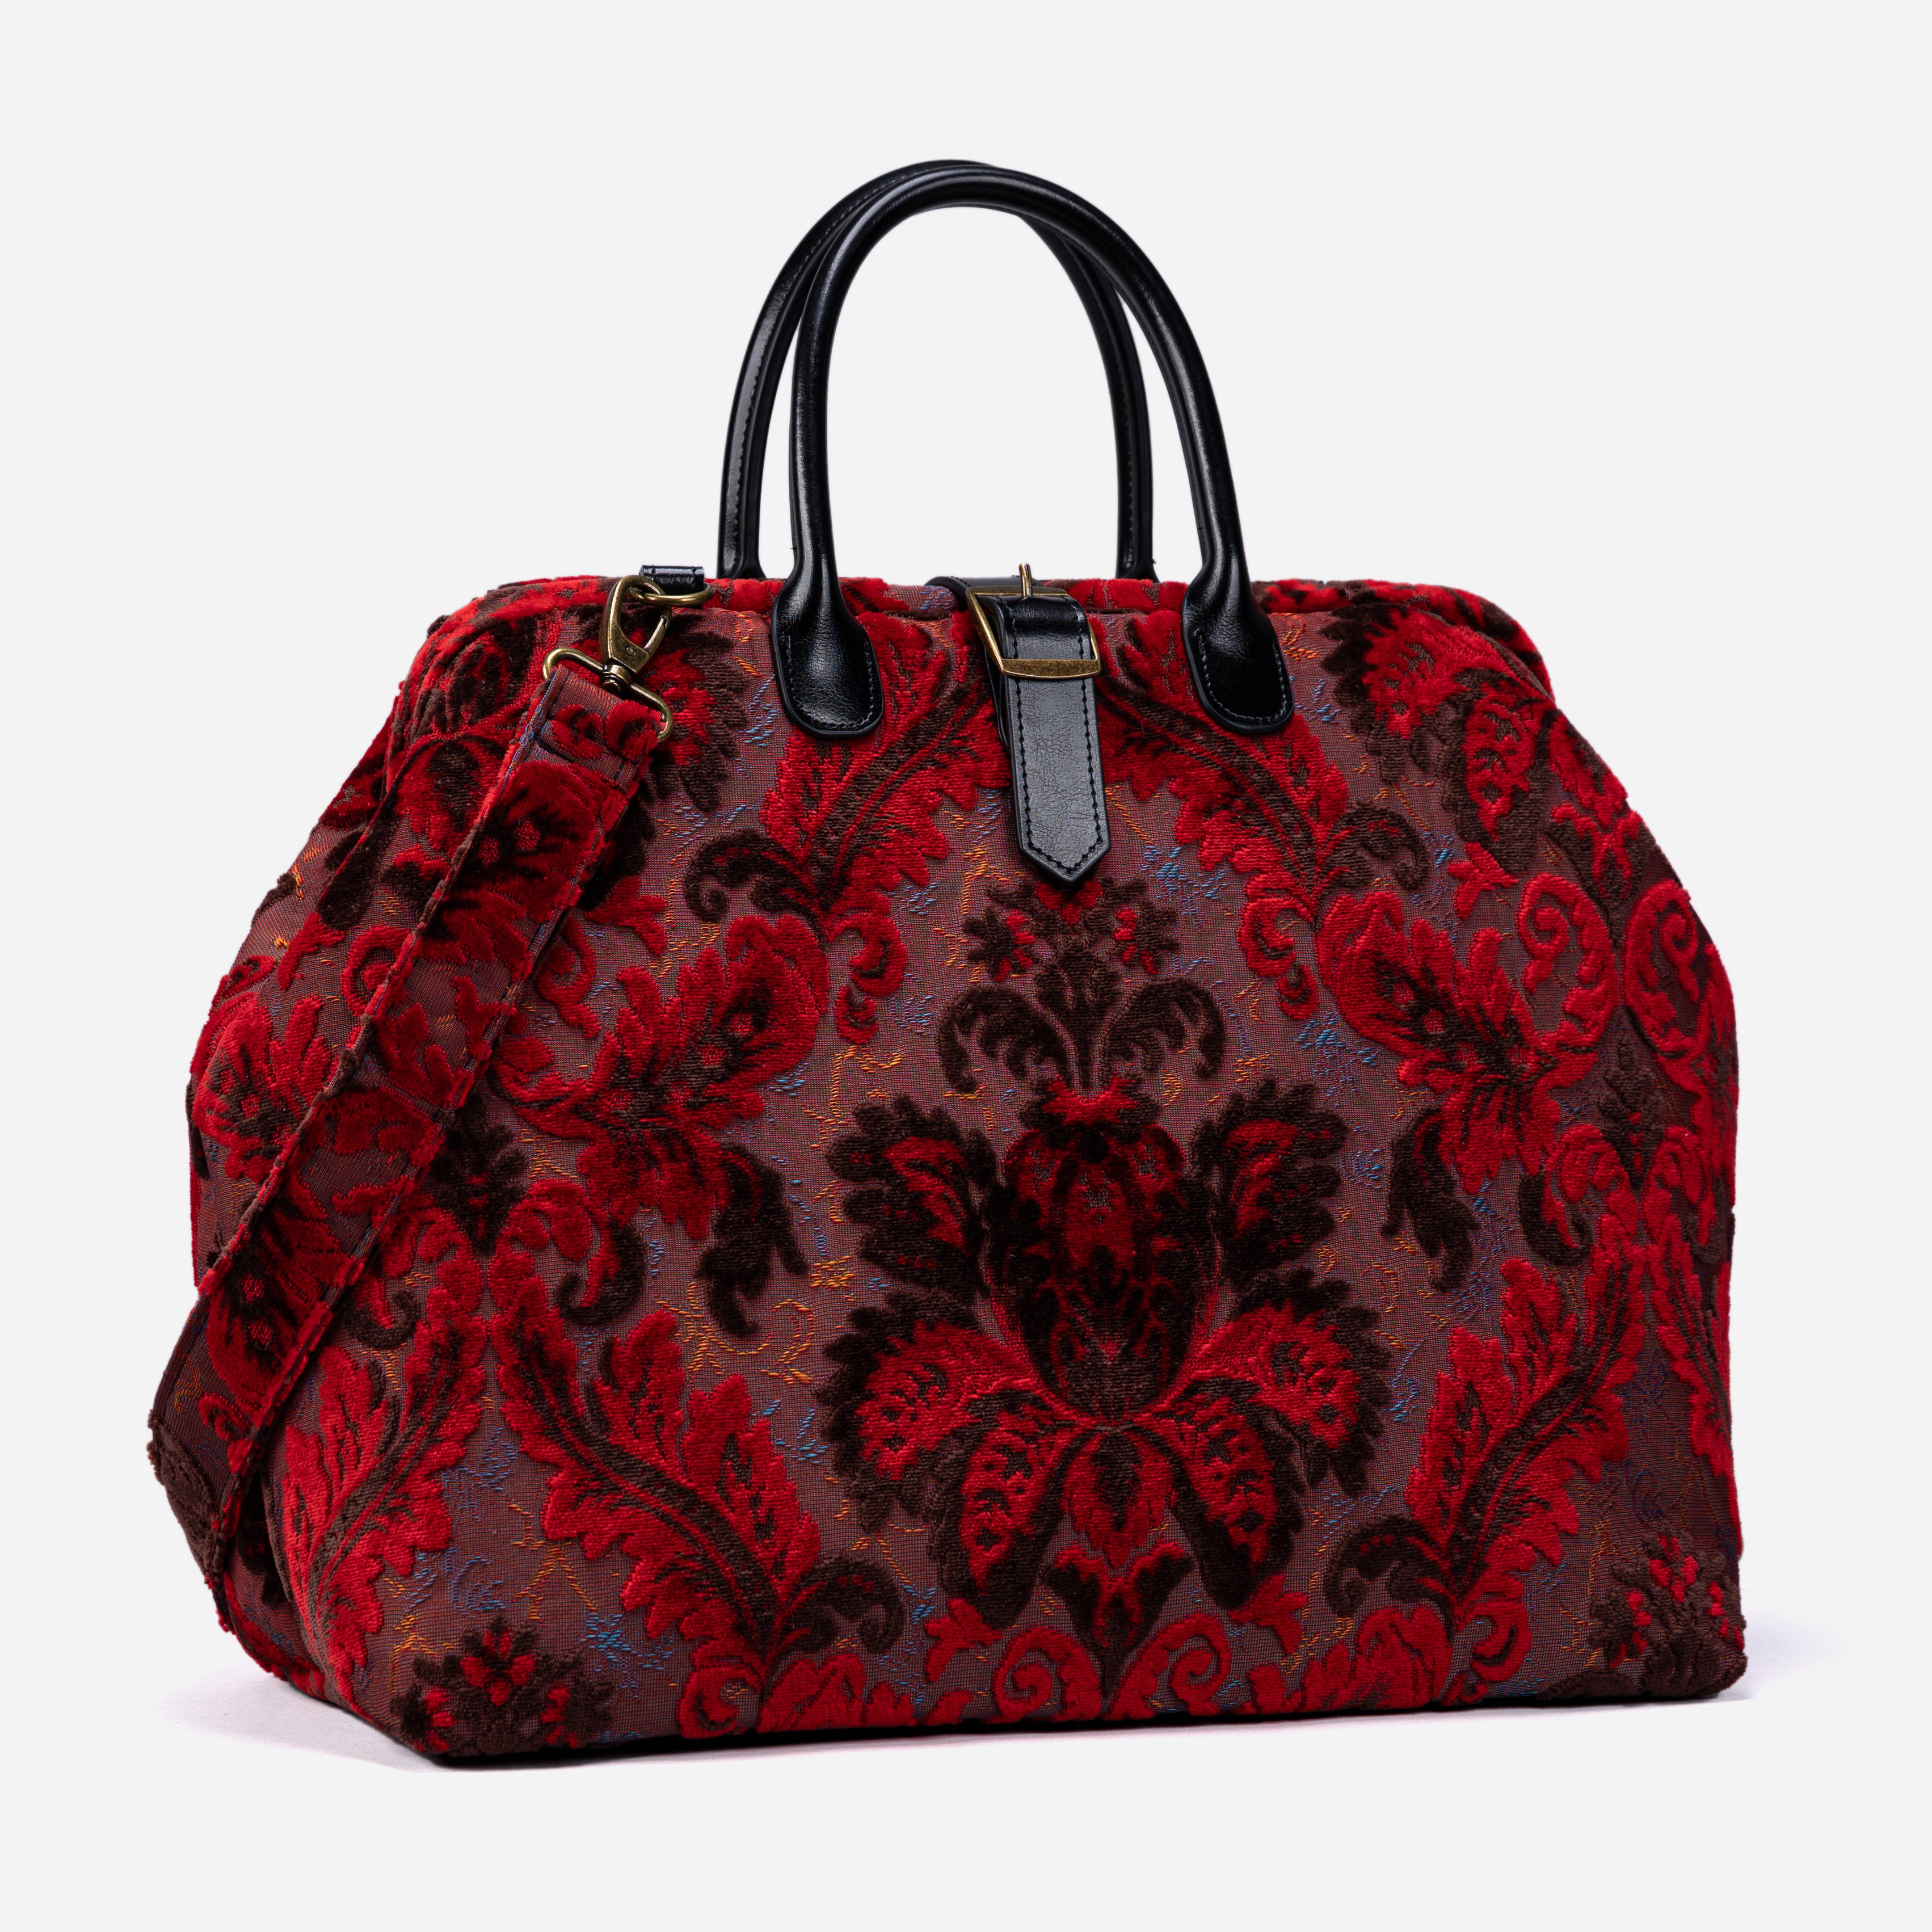 Mary Poppins Carpetbag Revival scarlet weekender overview